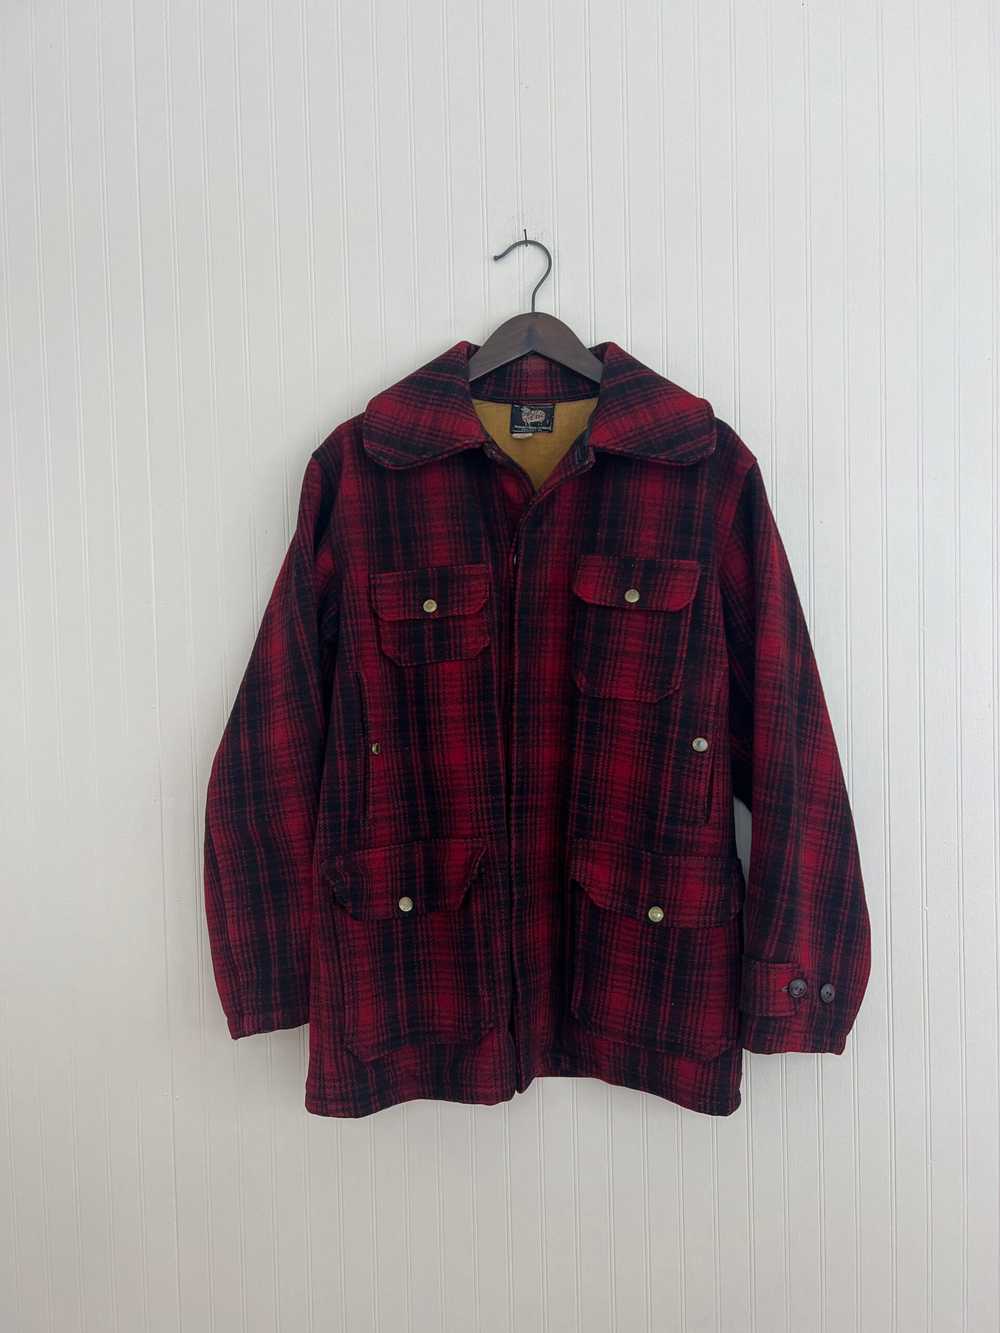 Late 40s/Early 50s Woolrich Mackinaw Wool Jacket - image 6